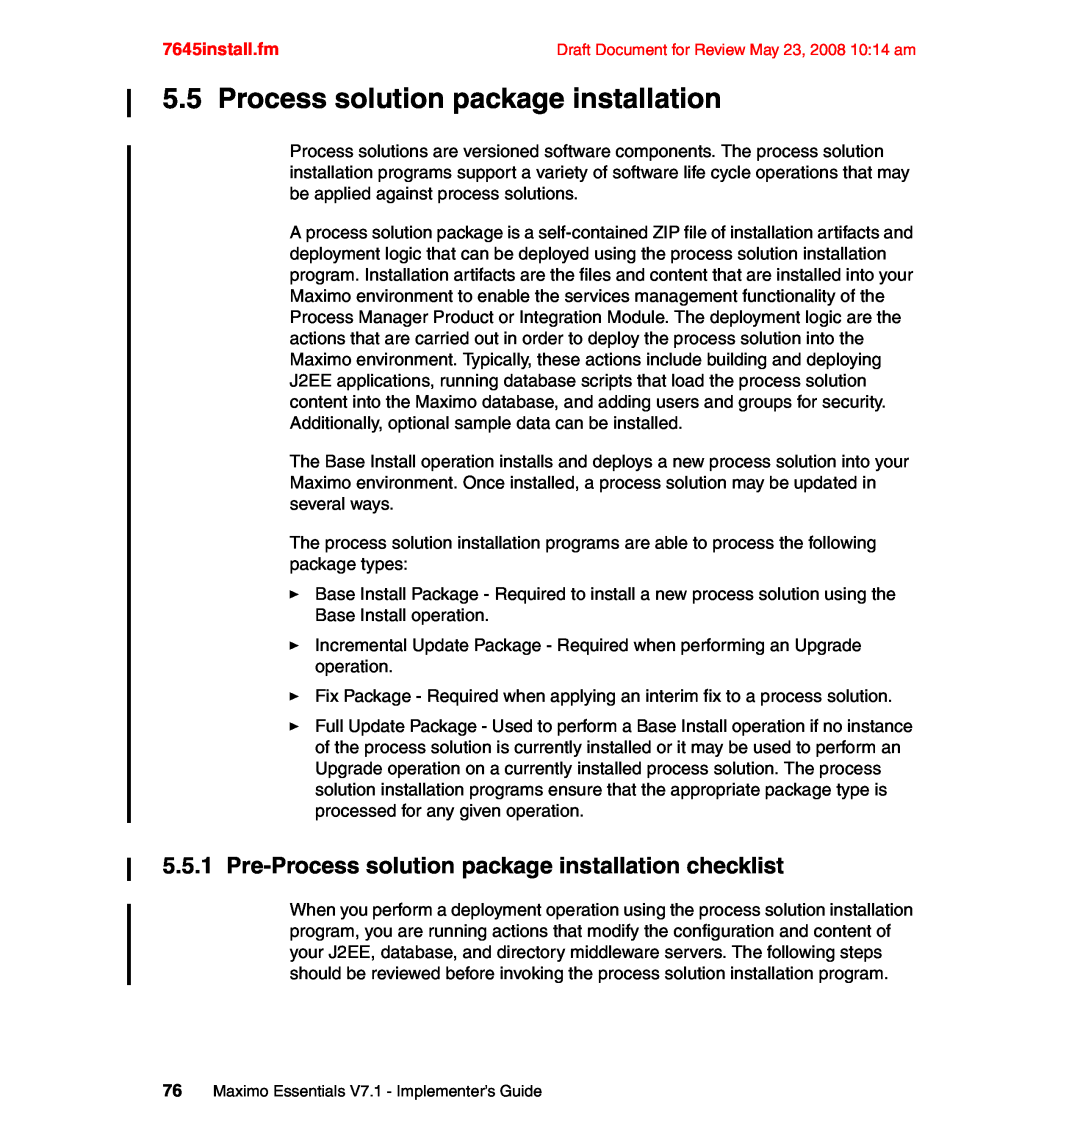 IBM SG24-7645-00 Process solution package installation, 7645install.fm, 76Maximo Essentials V7.1 - Implementer’s Guide 